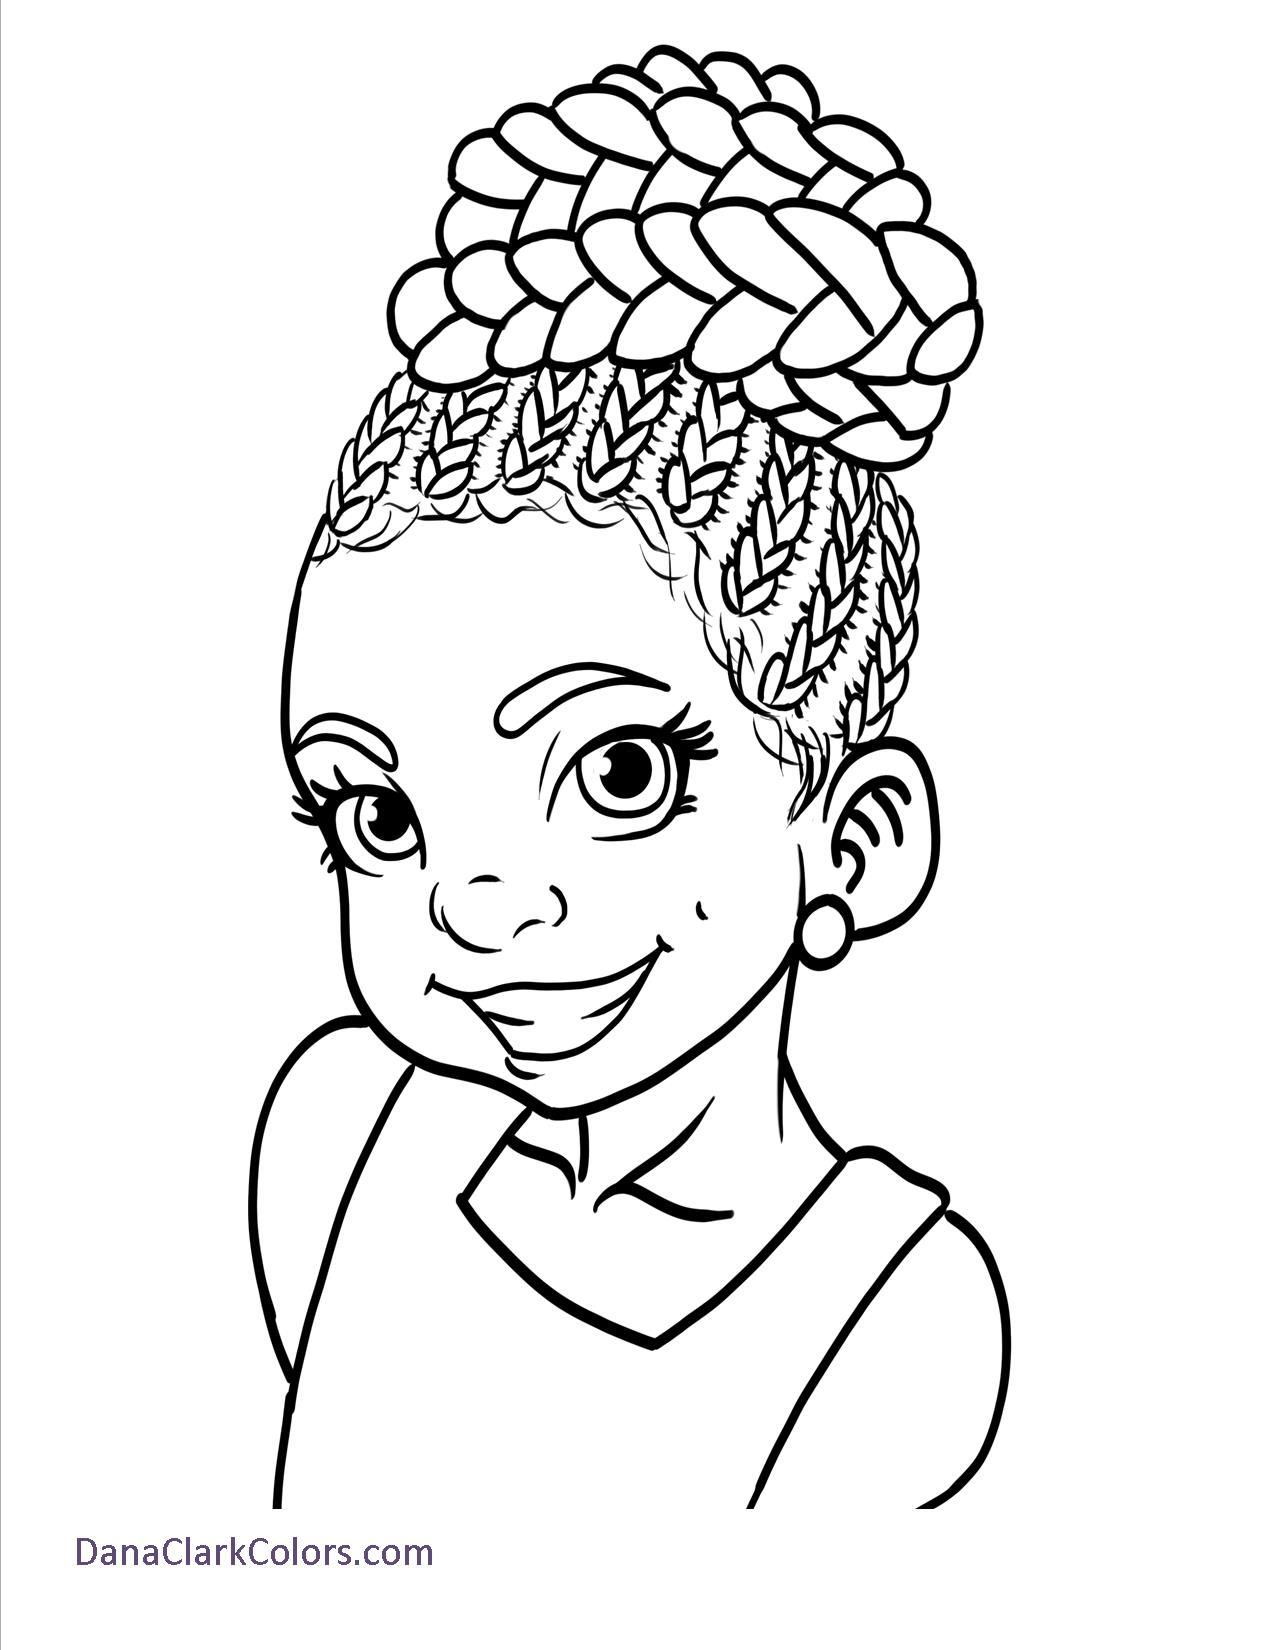 Free Coloring Pages - DanaClarkColors.com | Free coloring pictures, Coloring  pages for girls, Princess coloring pages